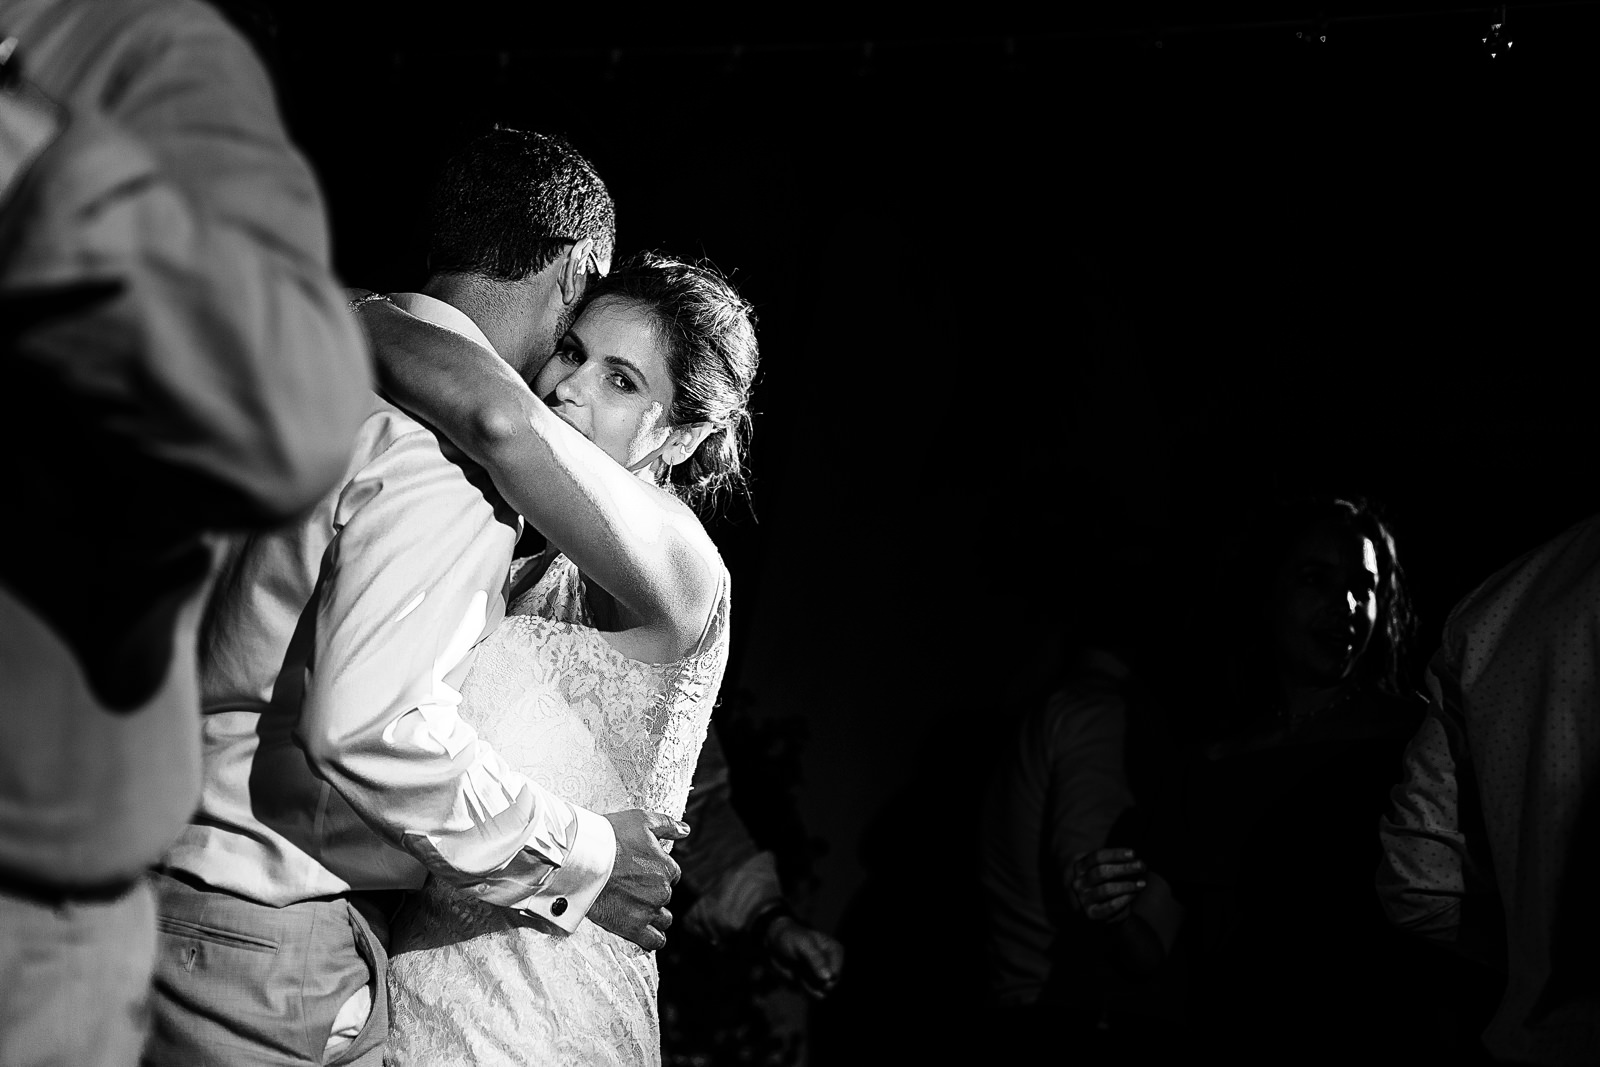 Destination wedding couple hugging and dancing during their reception party